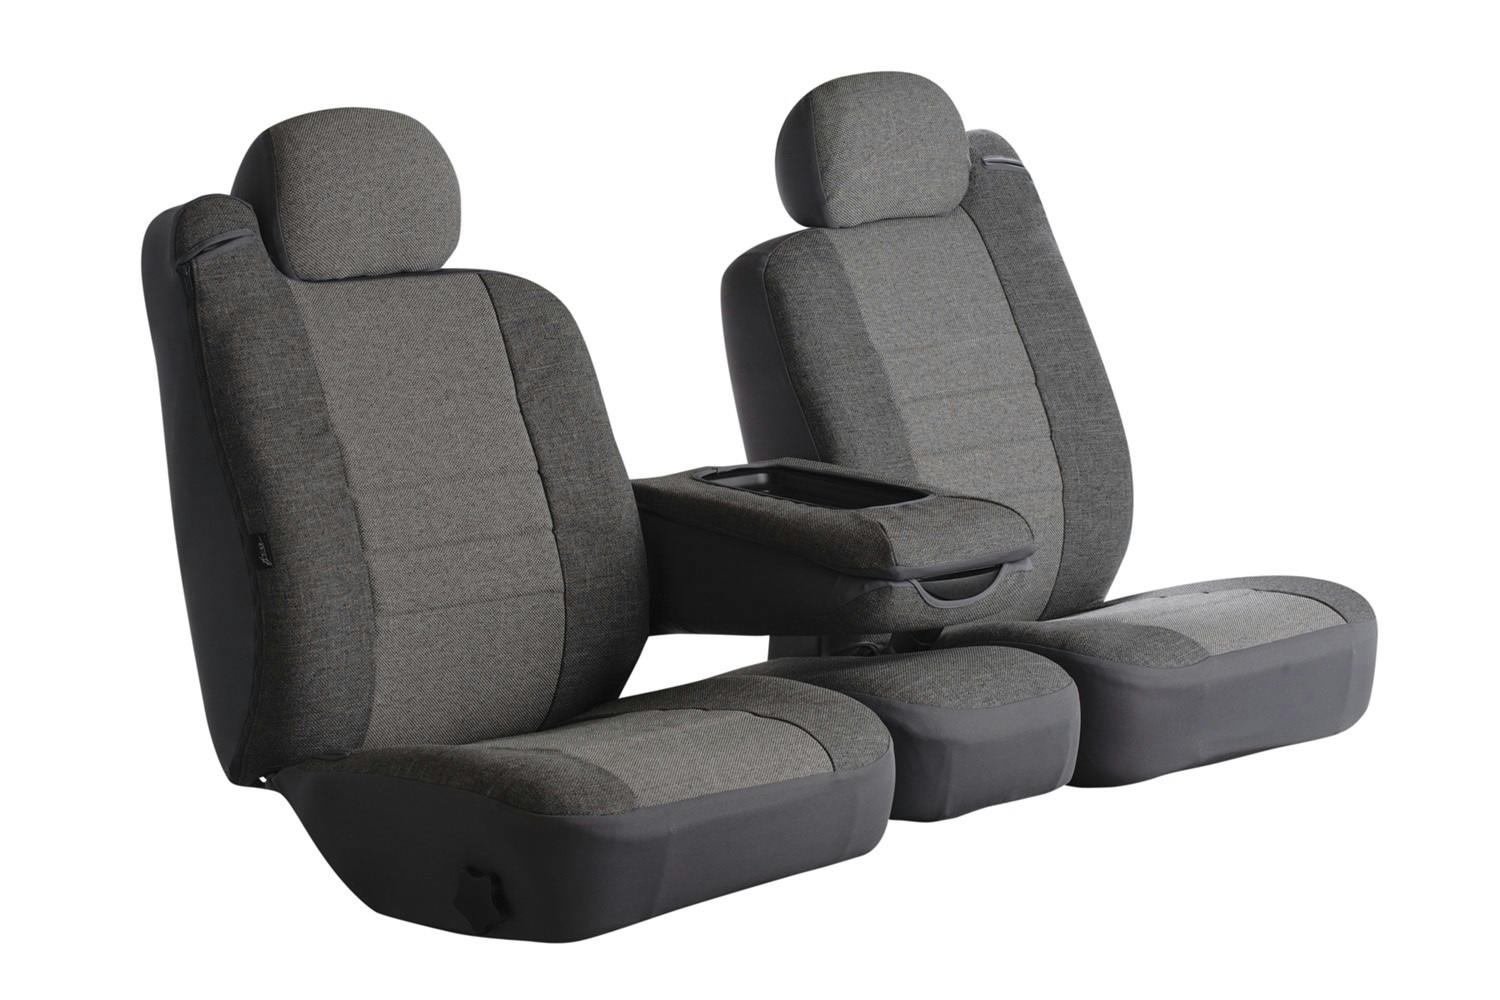 Jeep & Truck Interior Accessories - Seat Covers, Mats & More